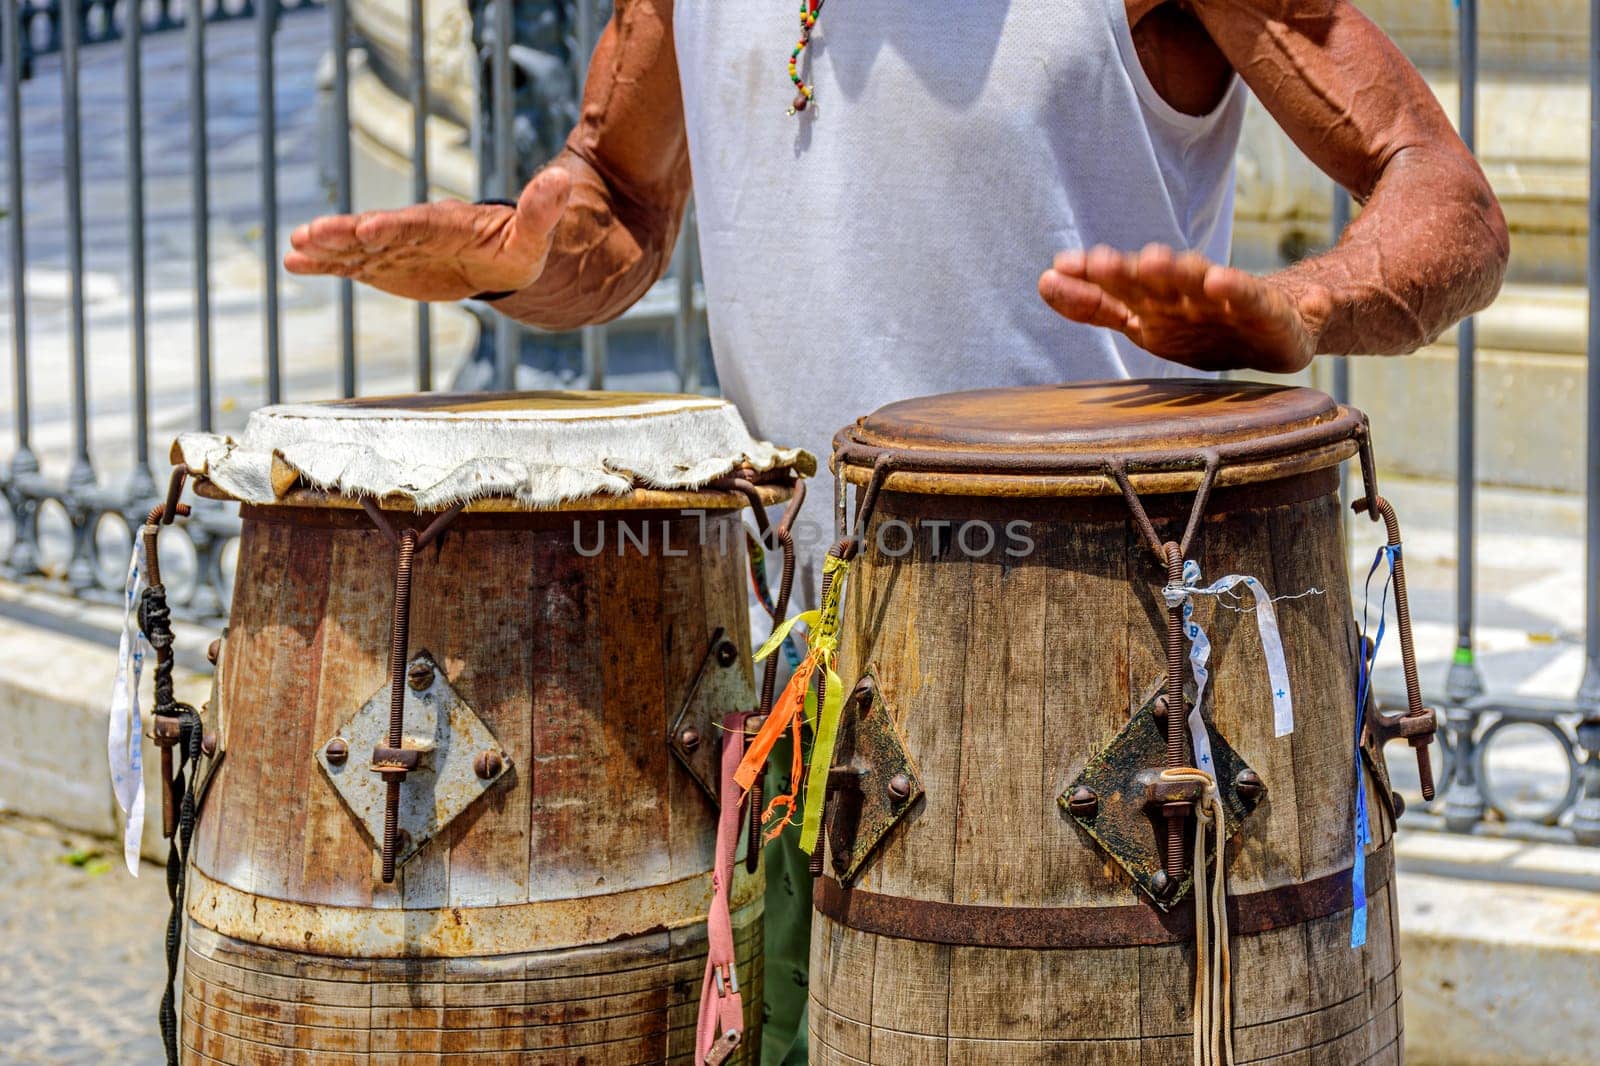 Drum player with his atabaque by Fred_Pinheiro